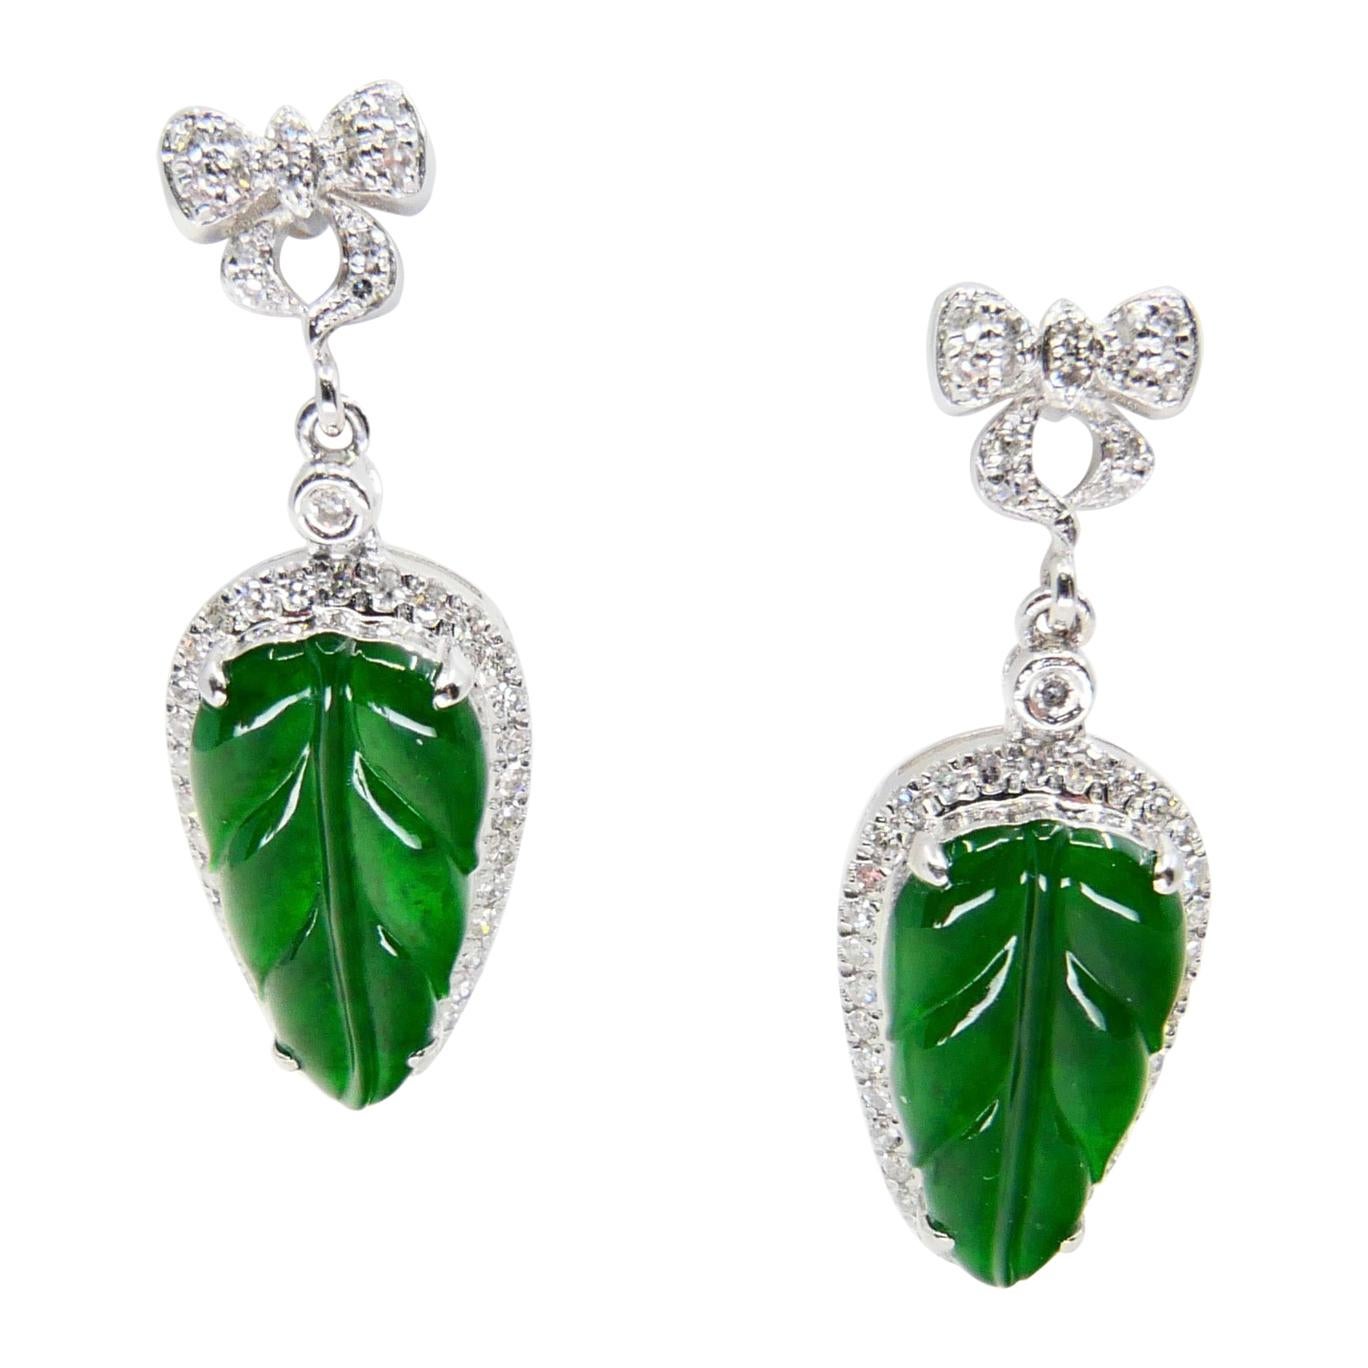 Certified Icy Imperial Green Jade & Diamond Earrings, Collector's Quality